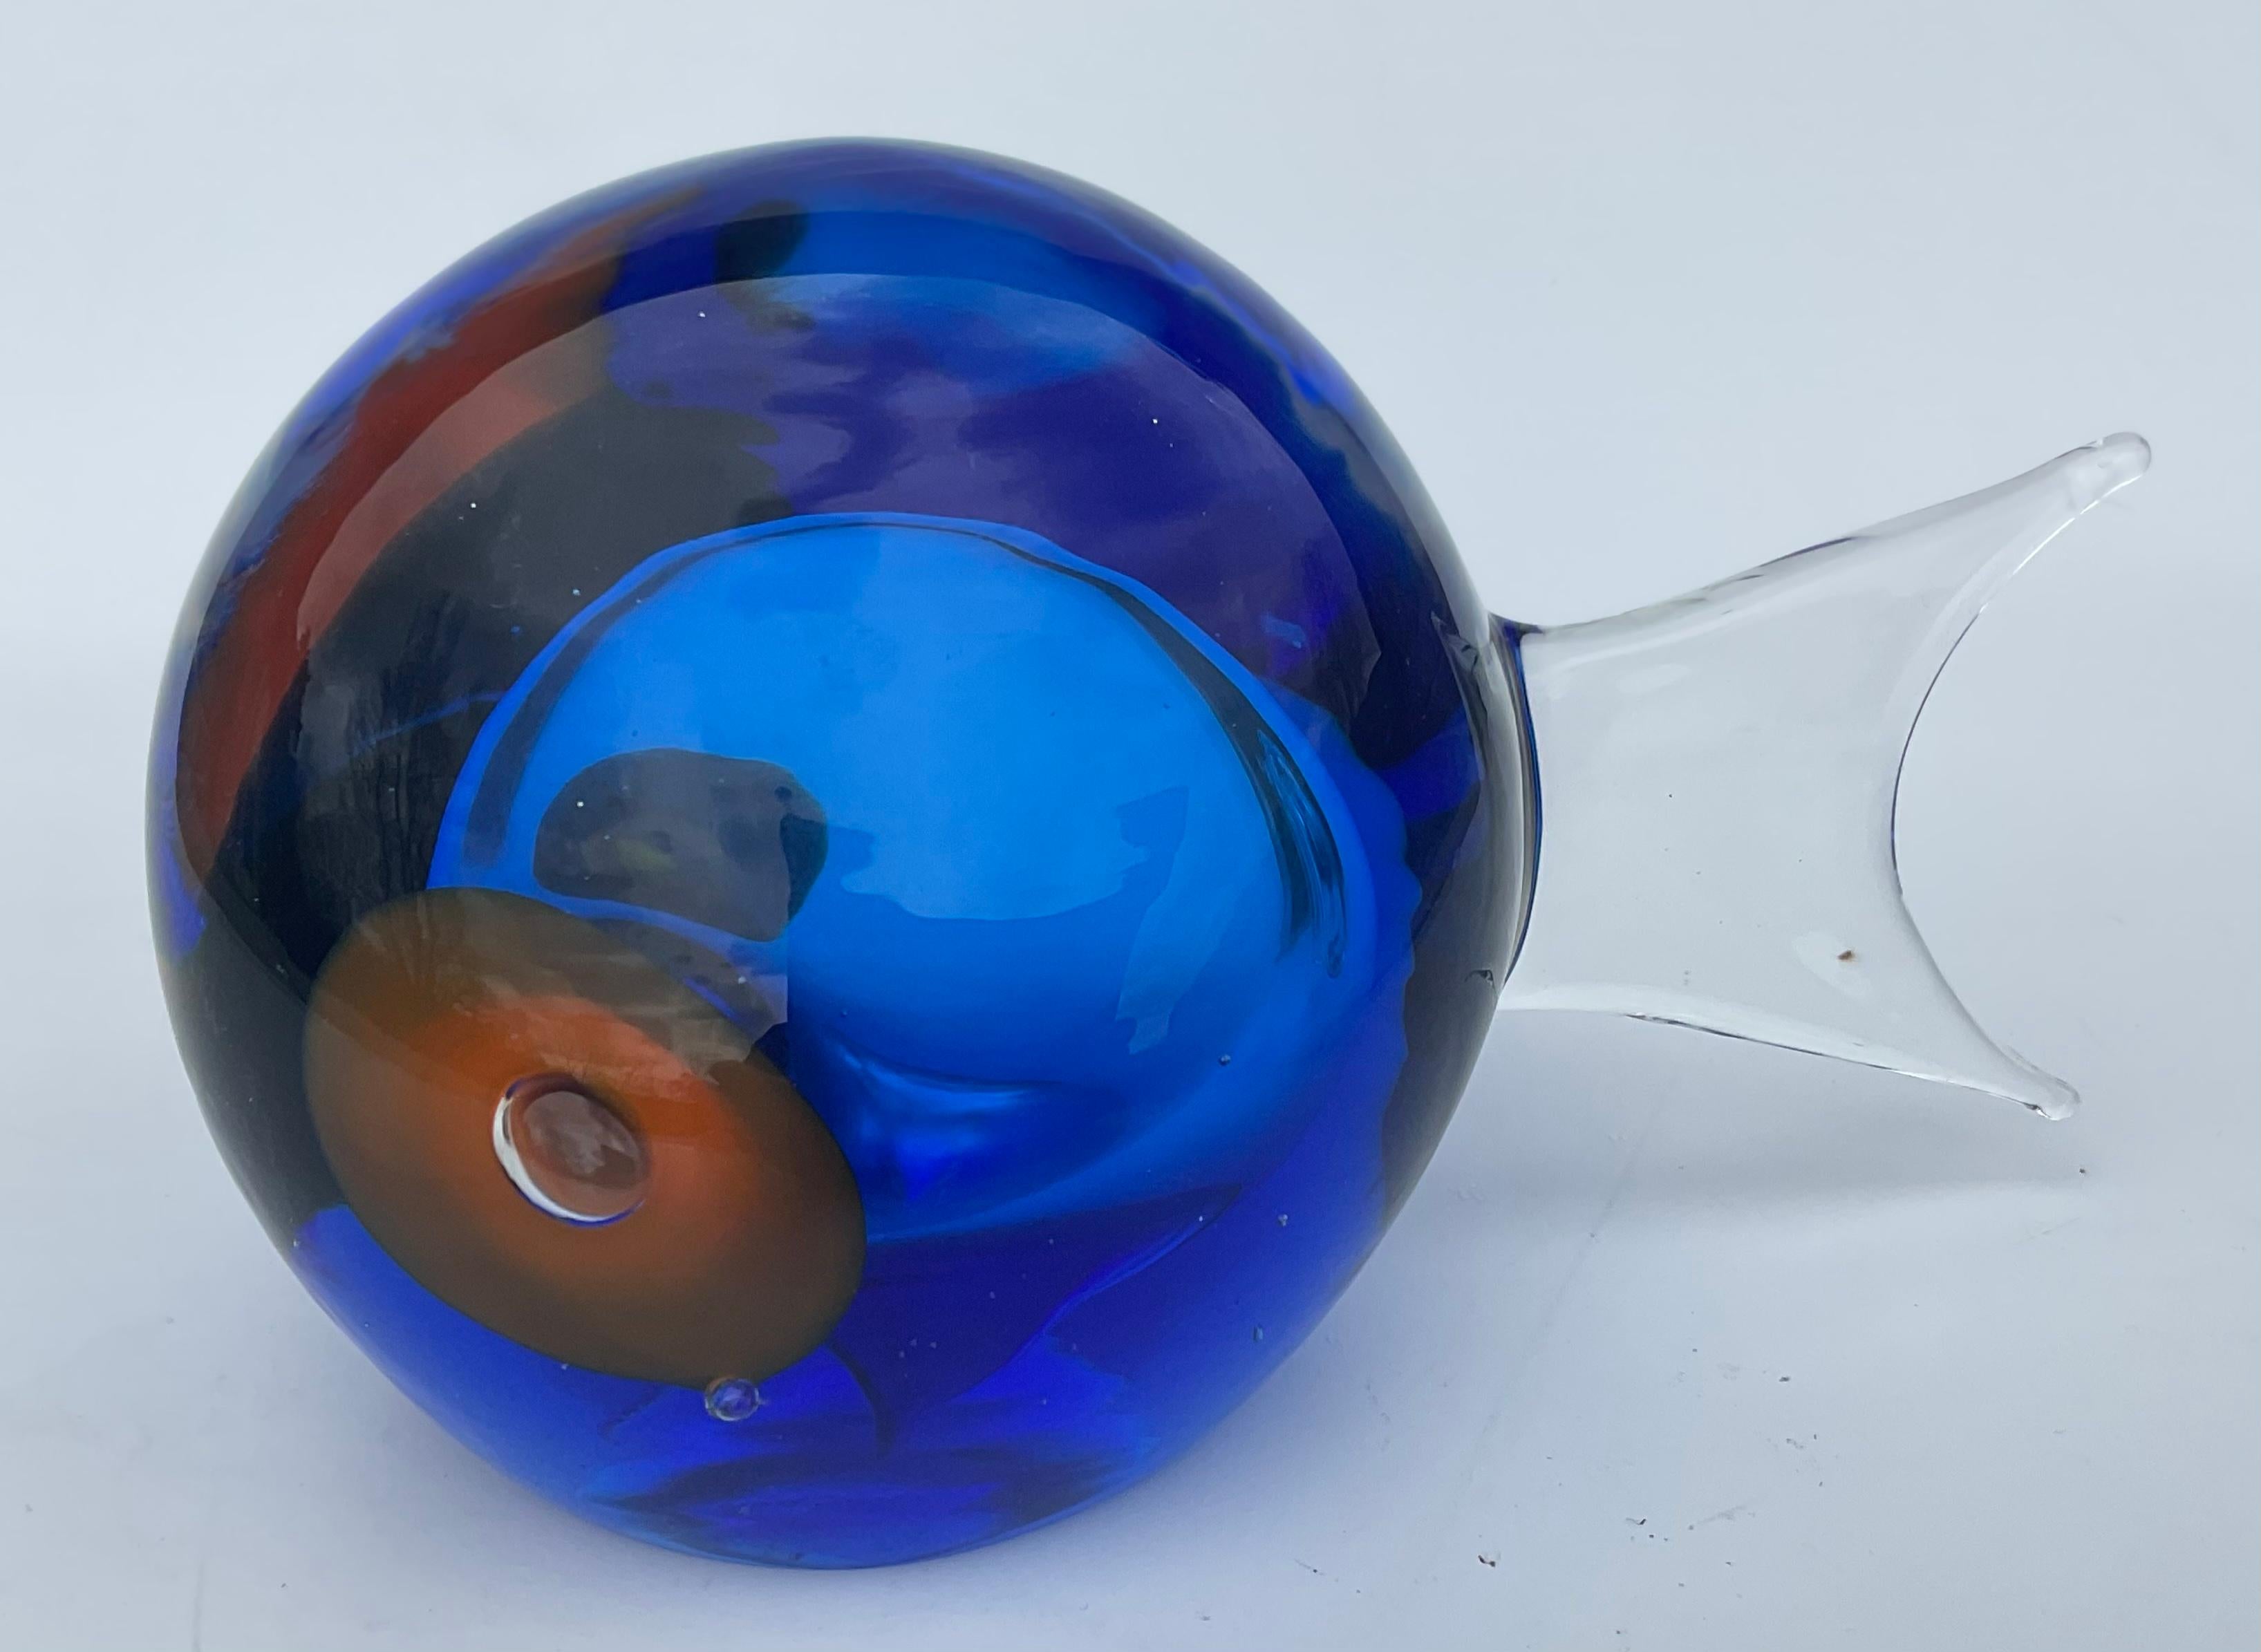 Antonio Da Ros Cenedese Murano glass Sommerso fish sculpture in vibrant blue with large red eyes.